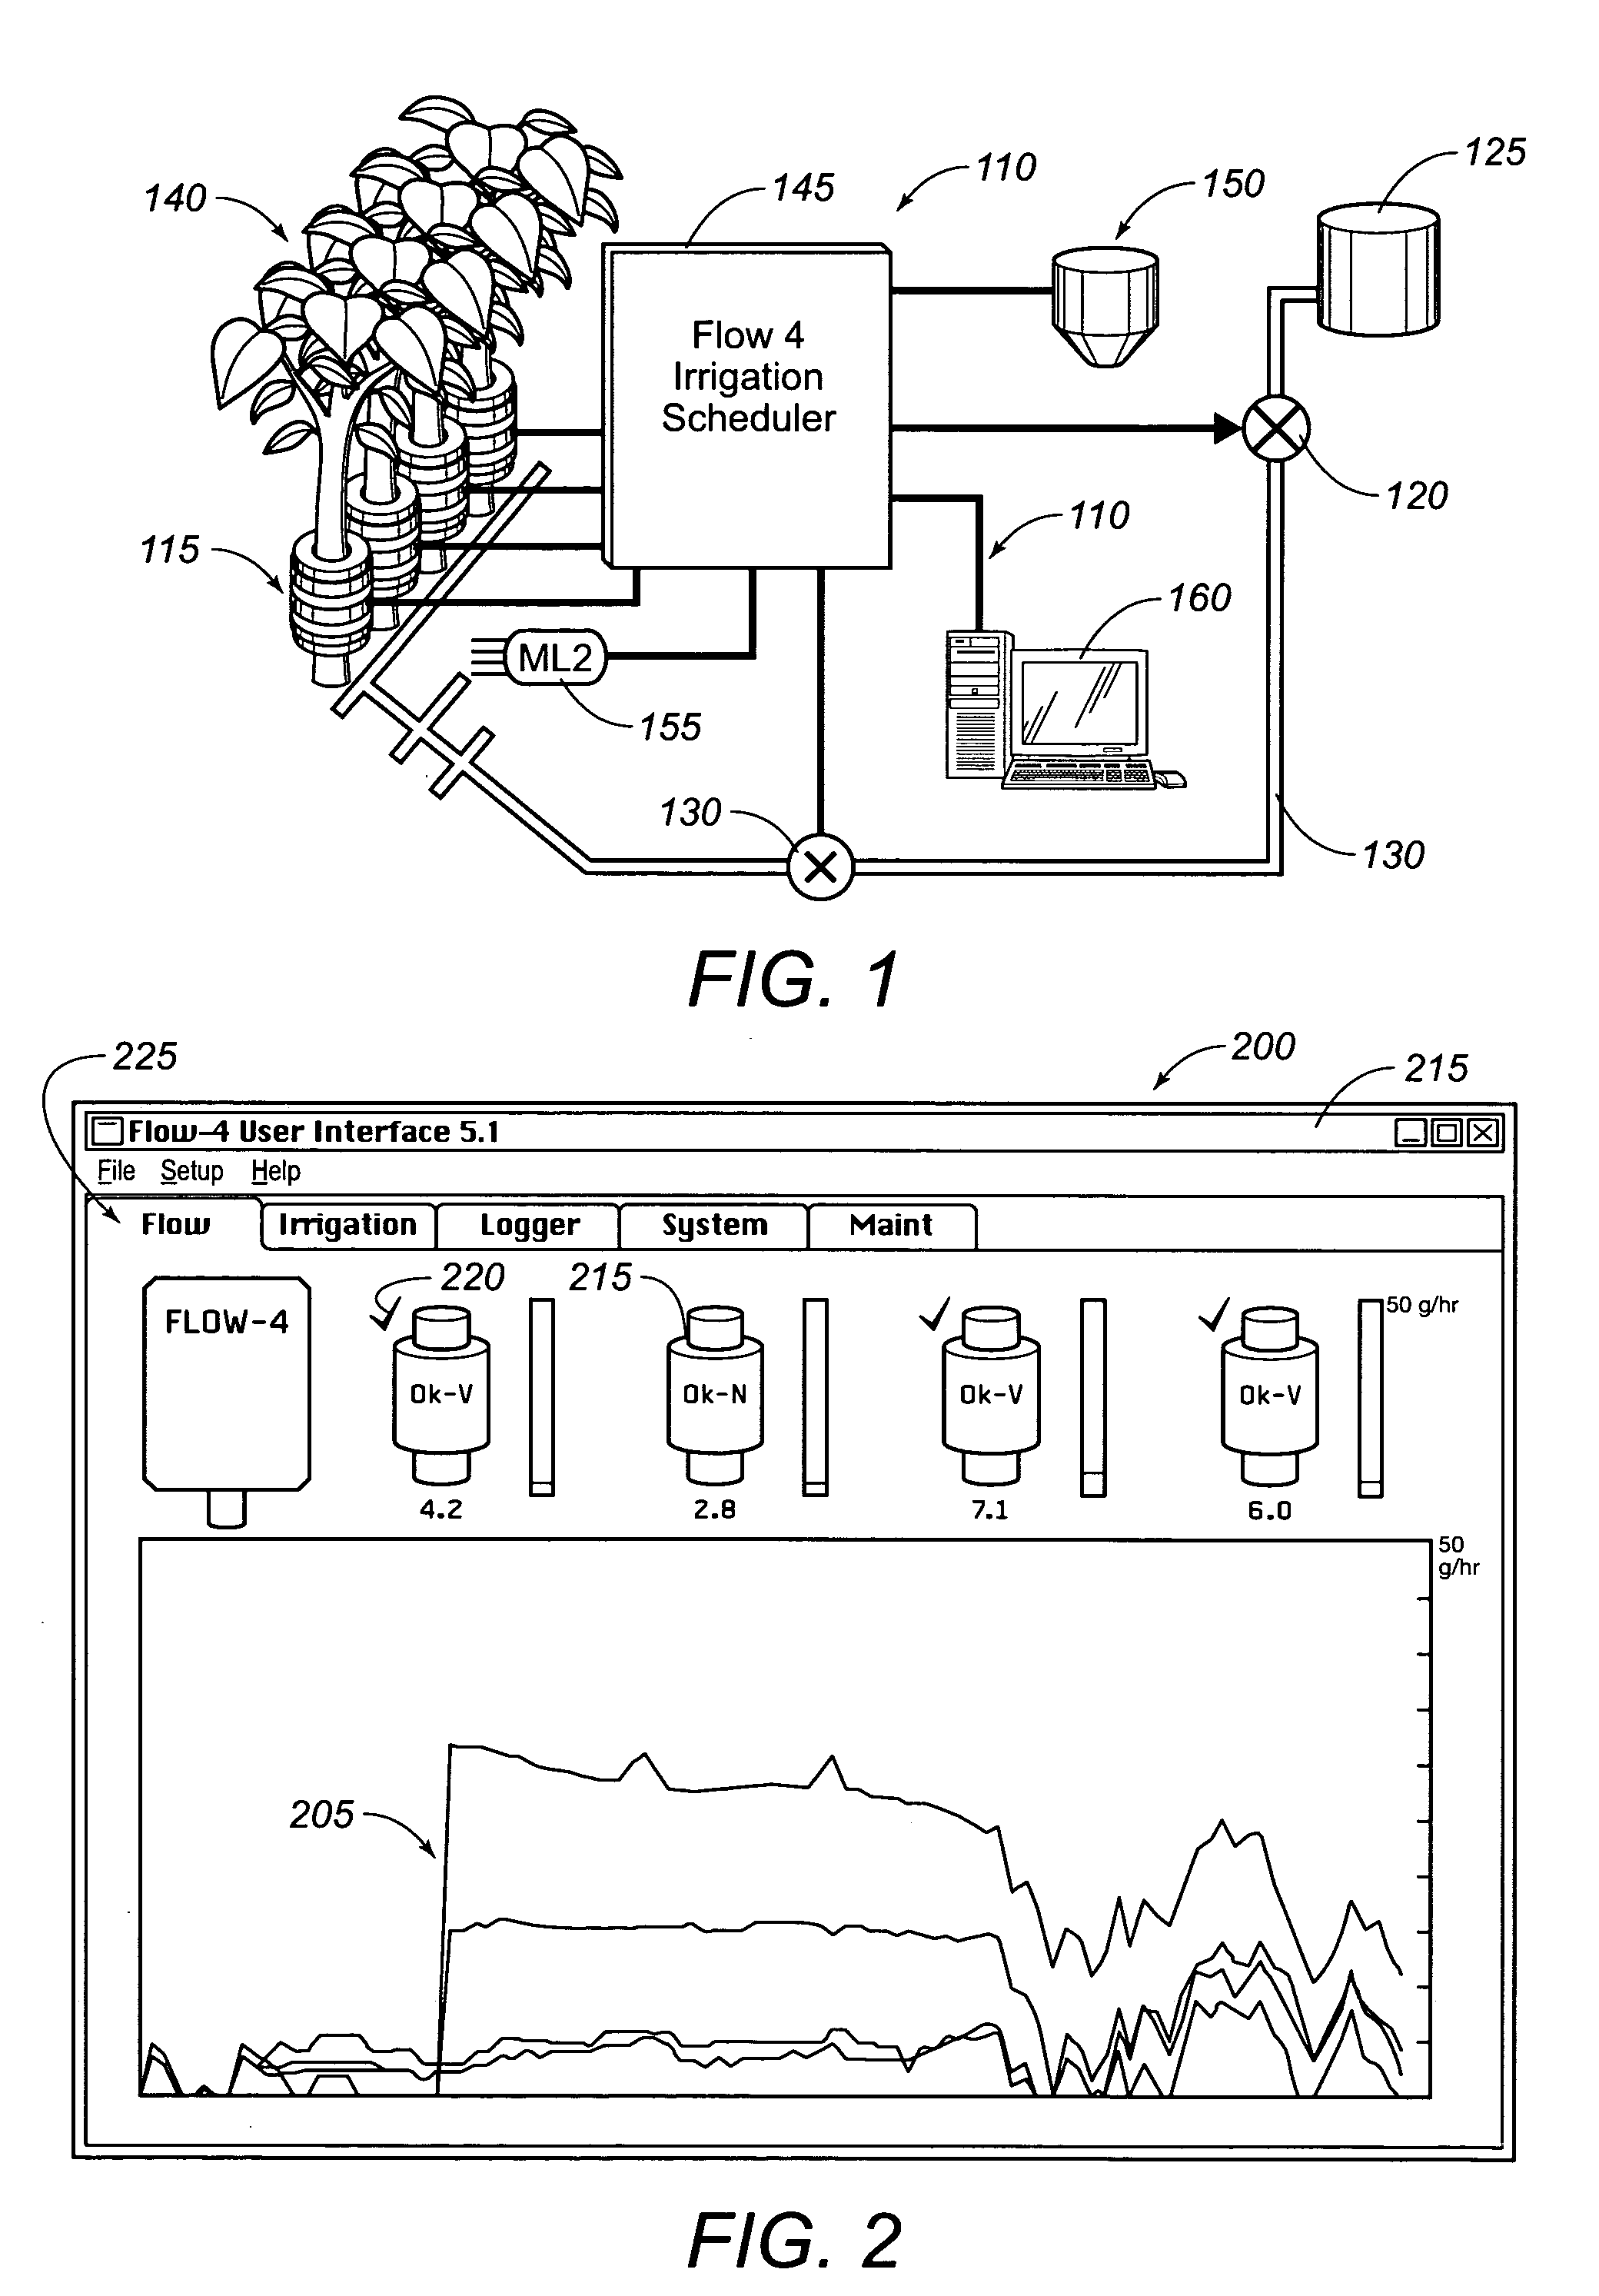 Integrated sap flow monitoring, data logging, automatic irrigation control scheduling system